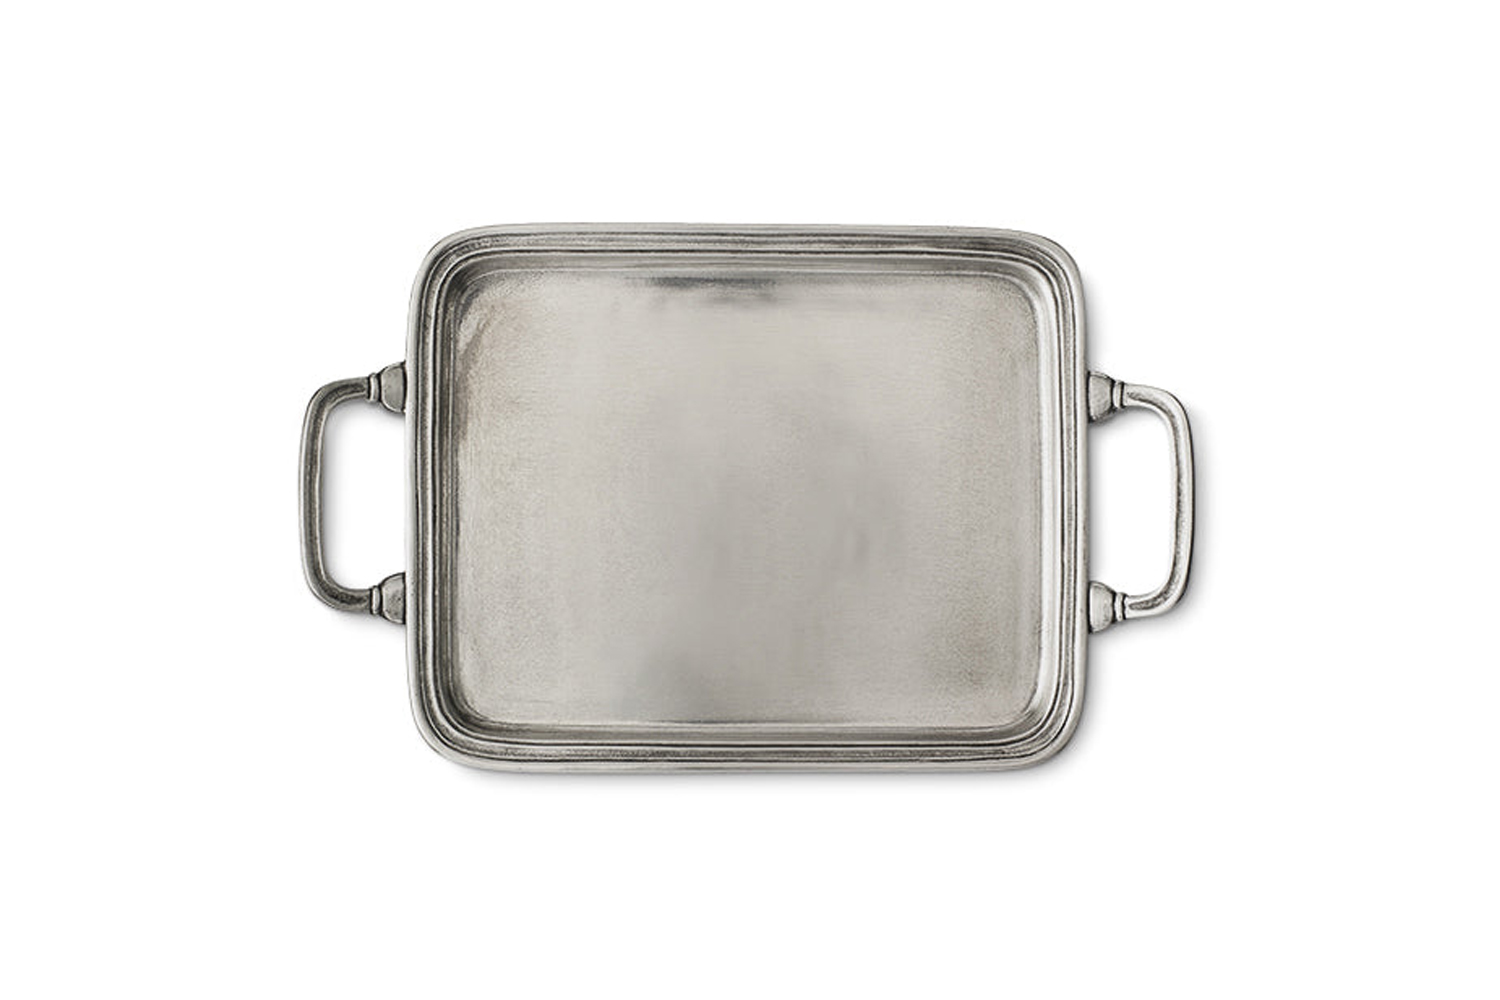 the match pewter rectangular tray with handles in size large is \$7\10 at nicke 10